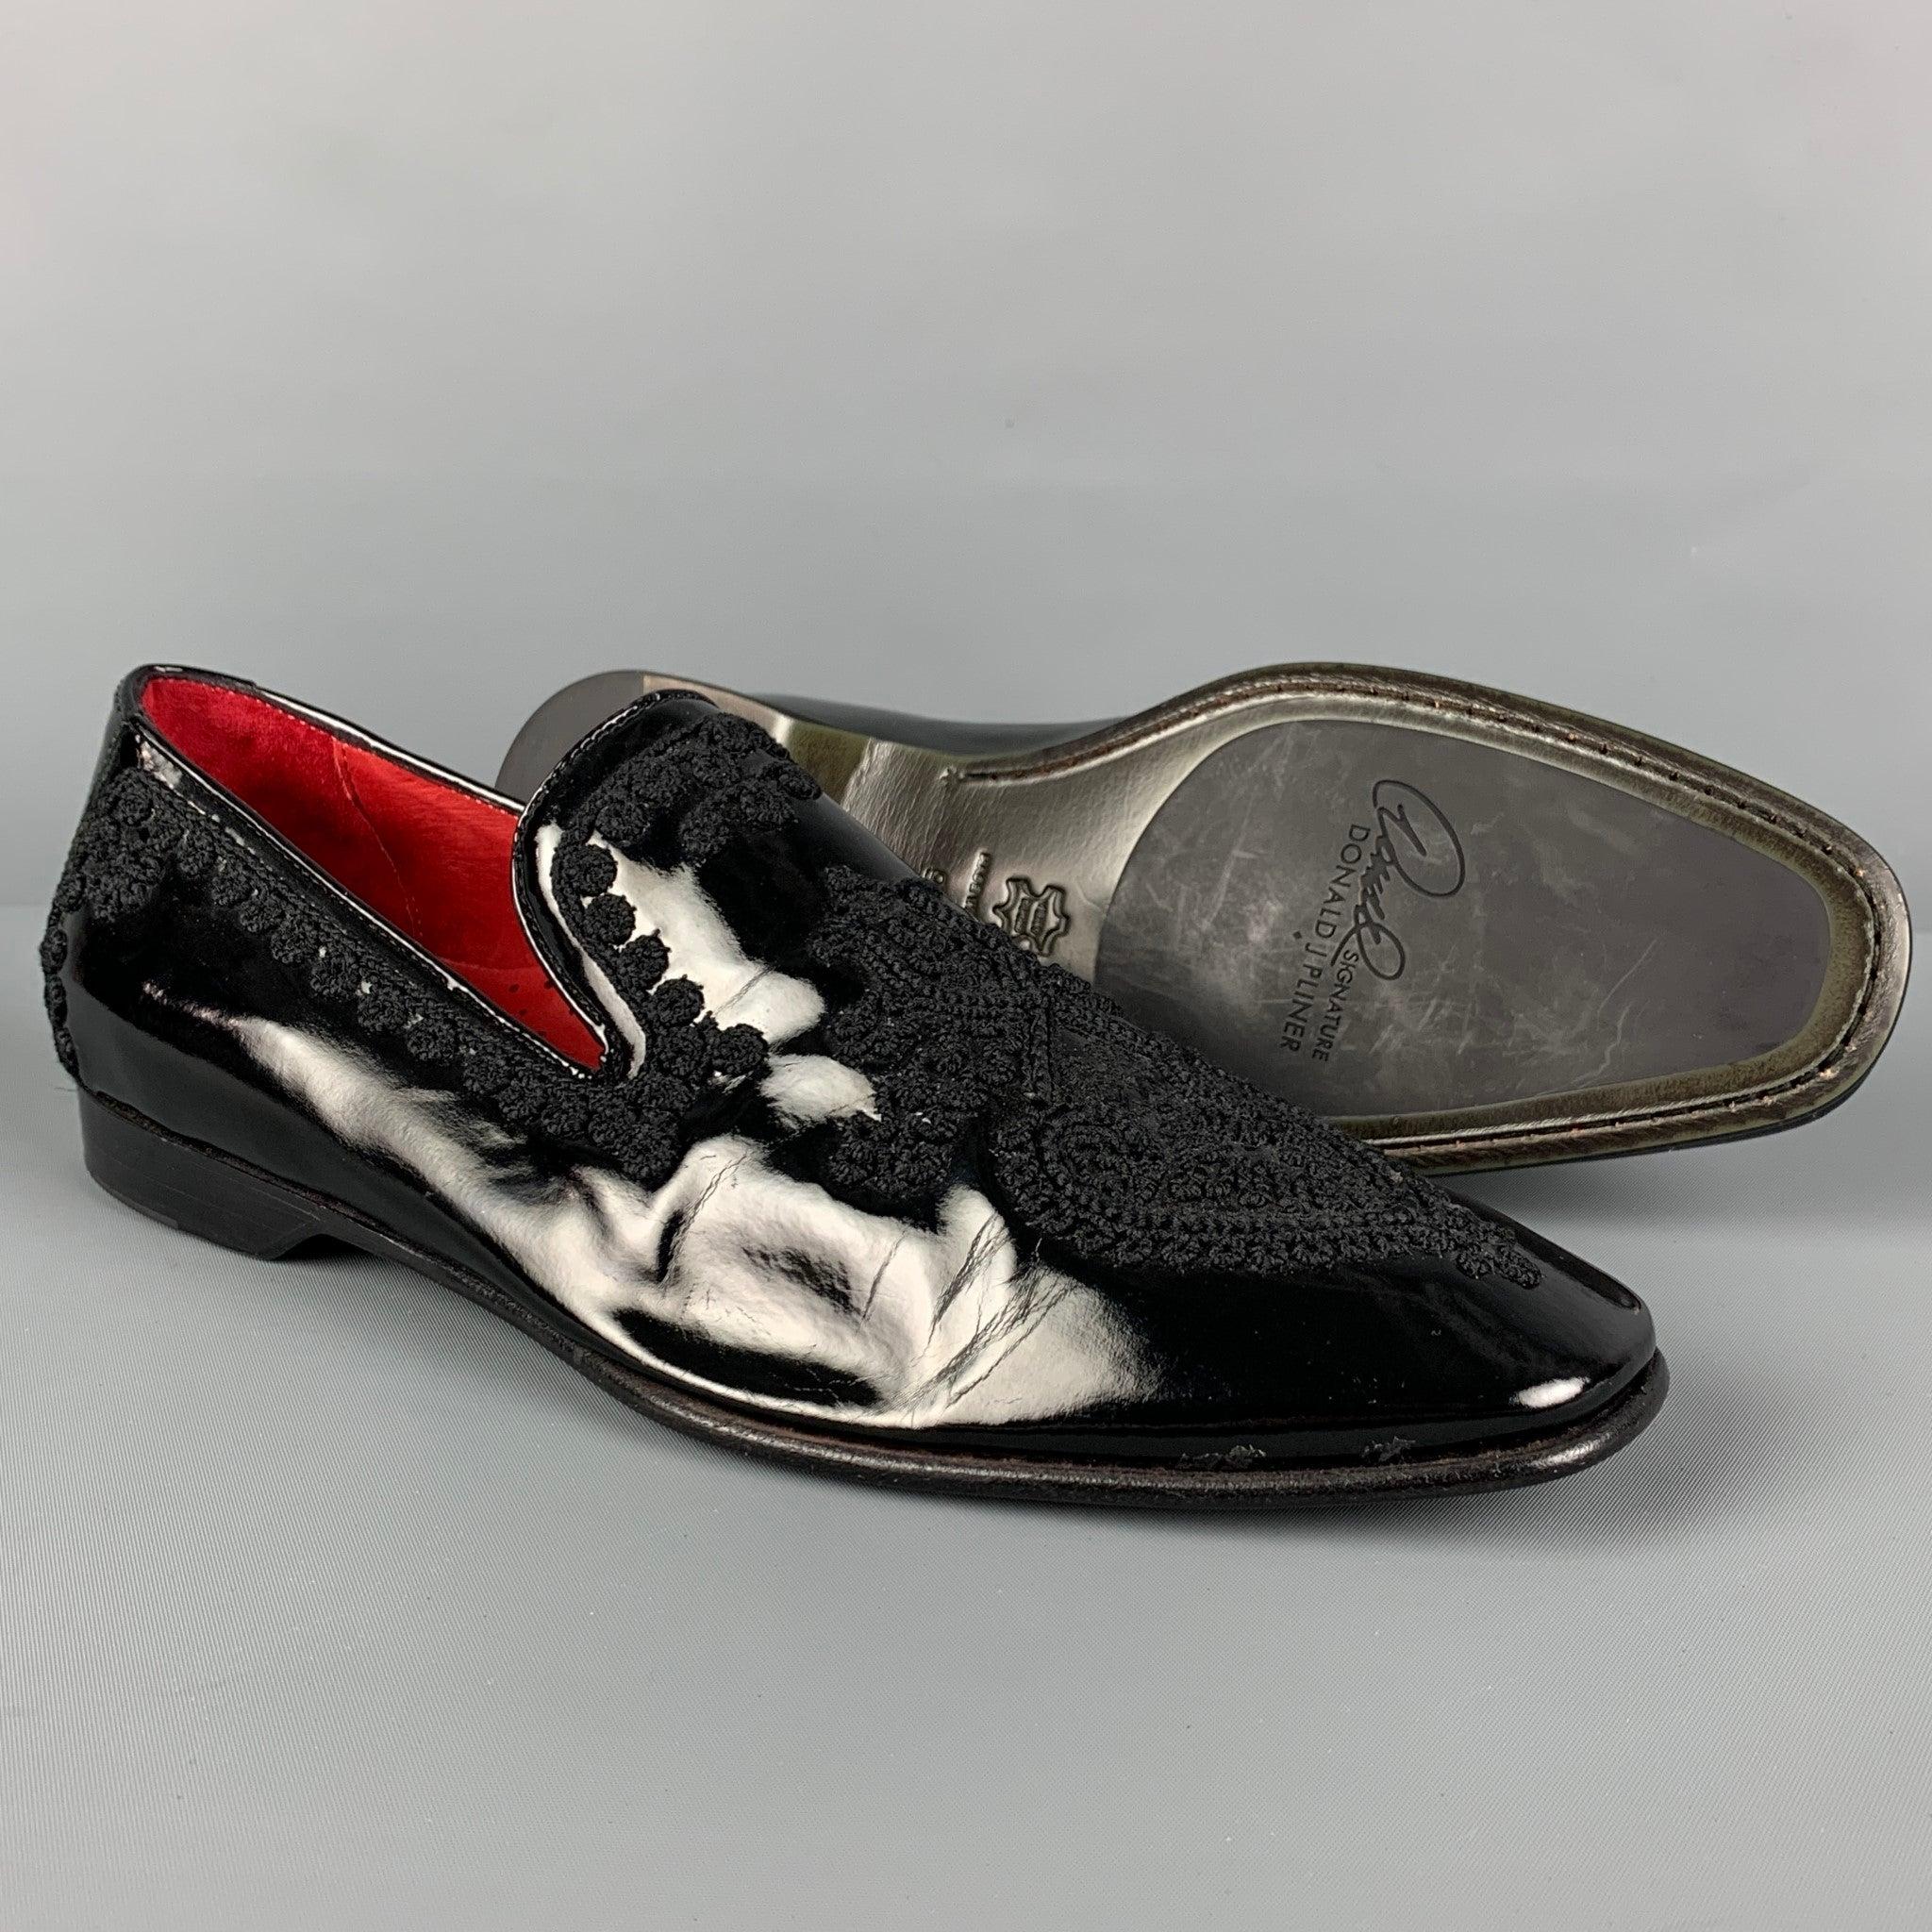 DONALD J PLINER SIGNATURE Size 9 Black Applique Leather Slip On Loafers In Good Condition For Sale In San Francisco, CA